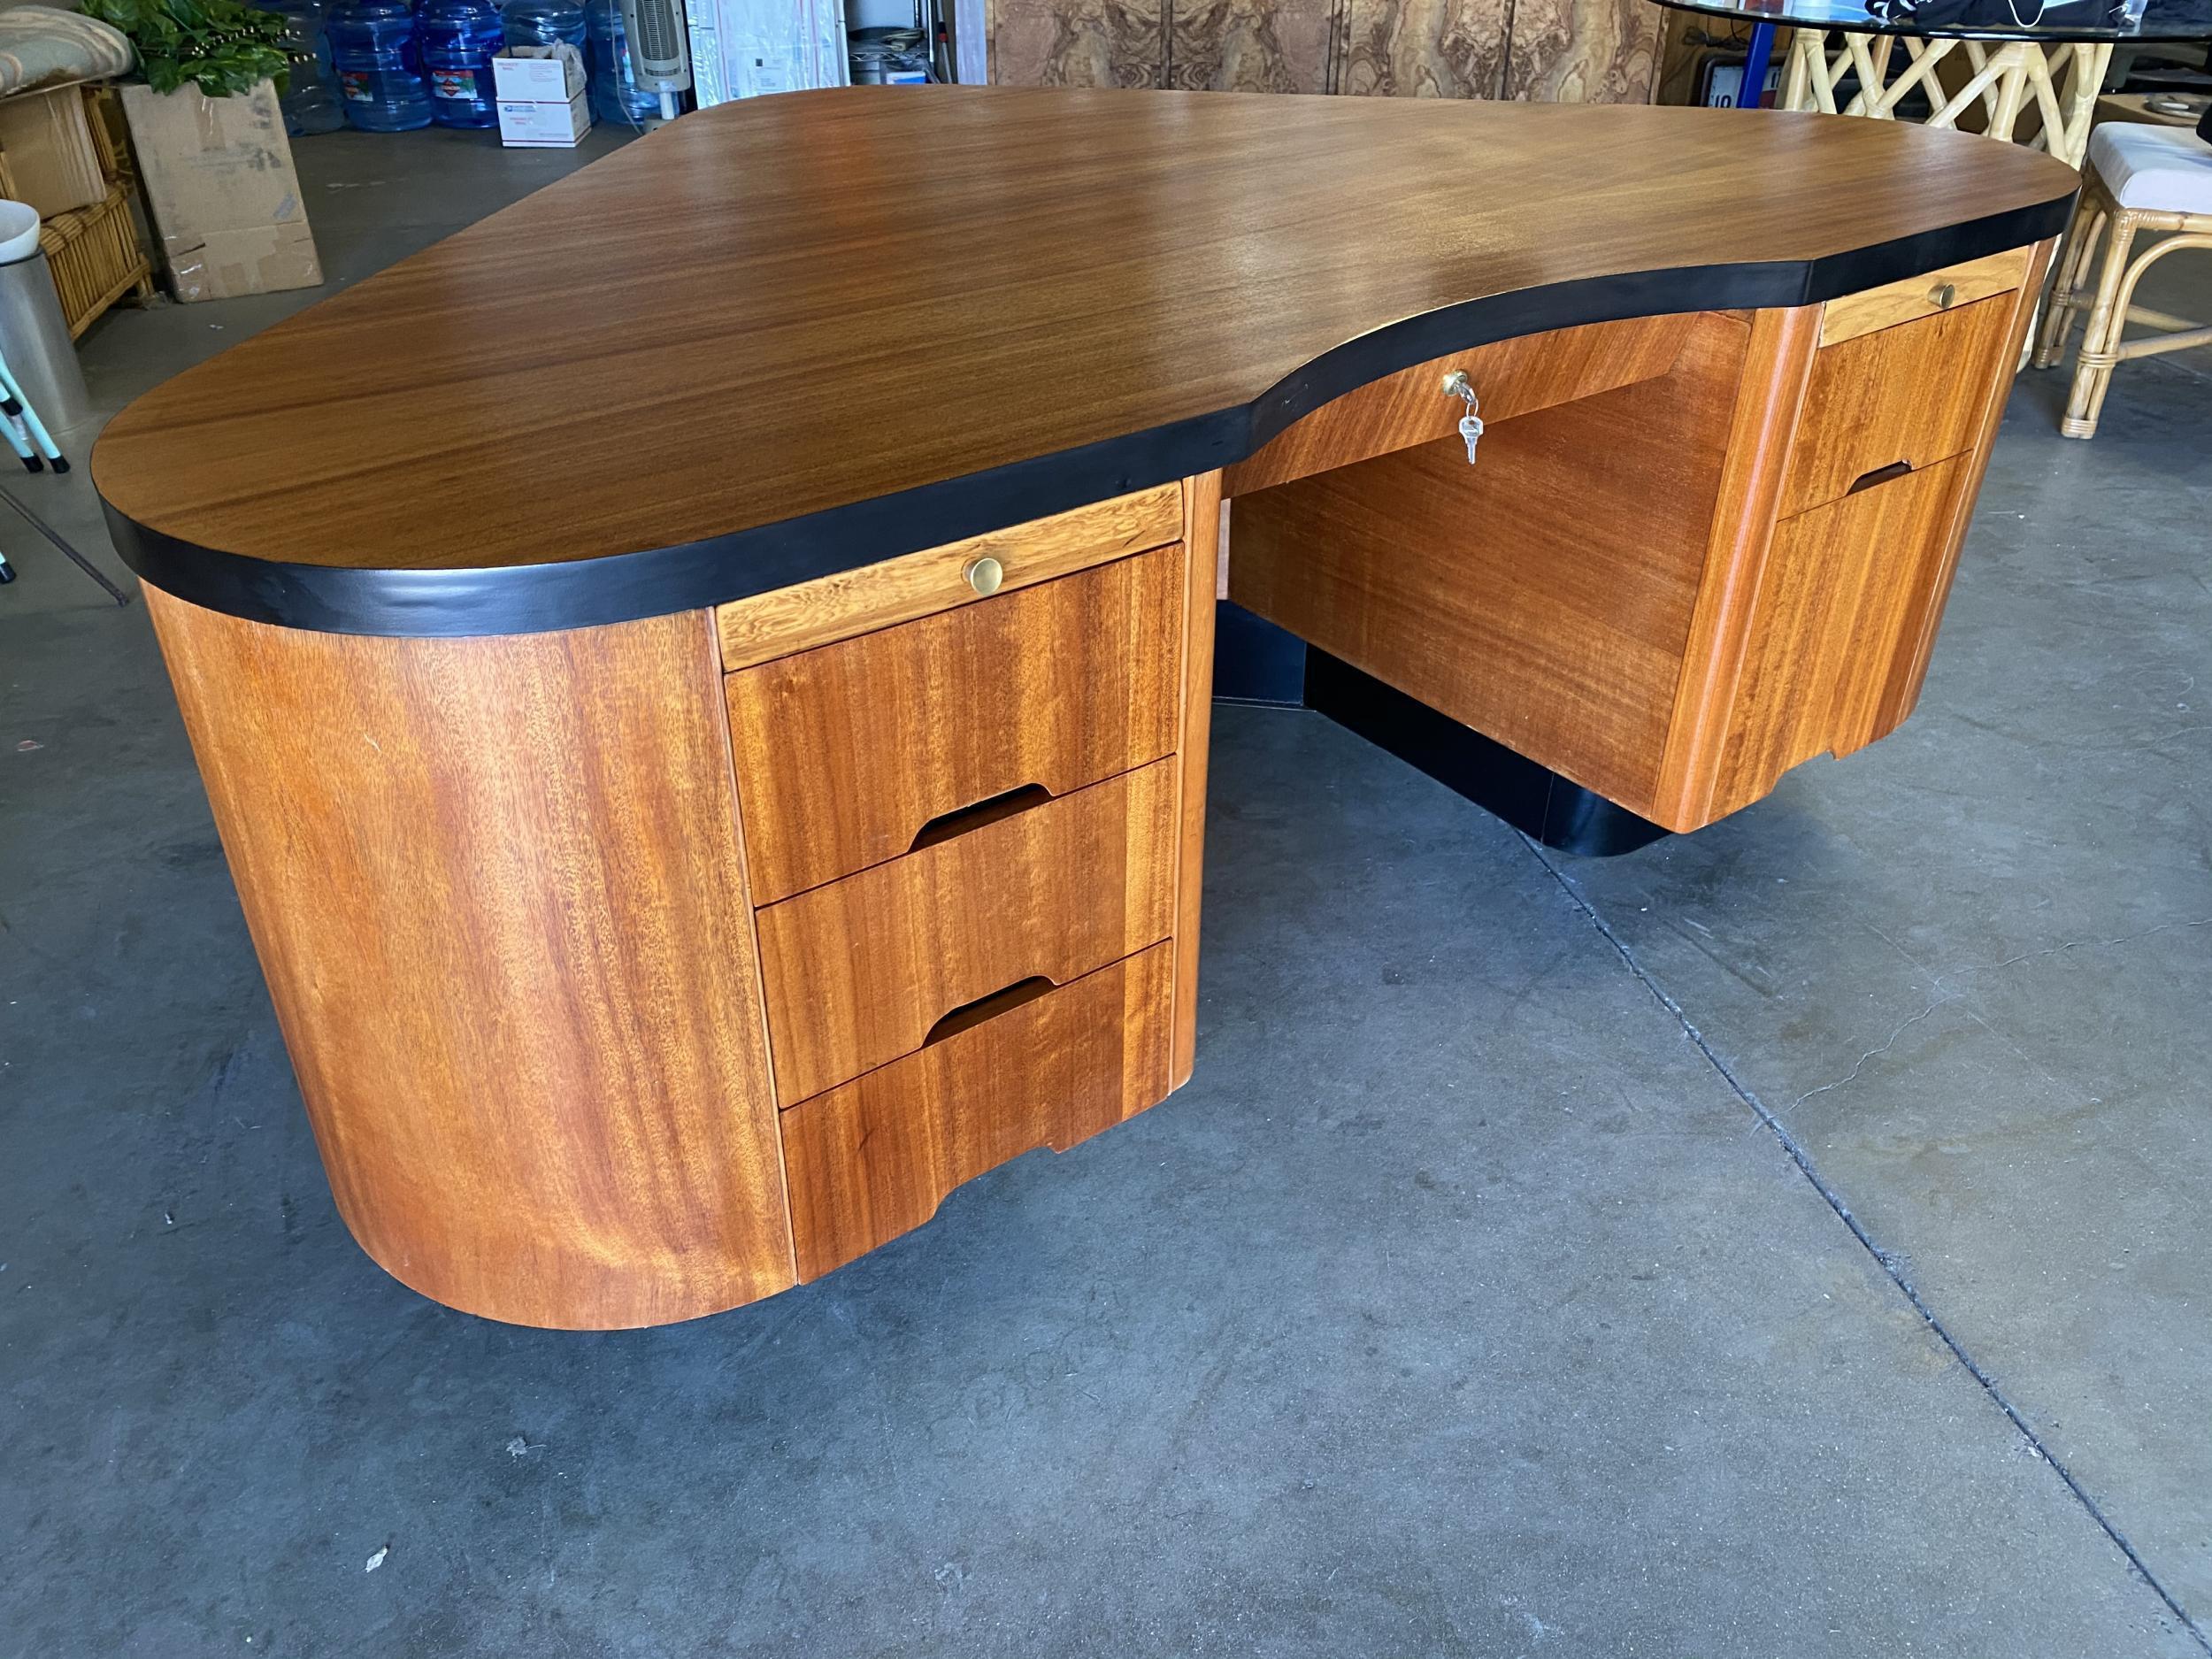 This large American Art Deco desk was designed by Frank Fletcher and manufactured by Fletcher Aviation in Pasadena, California. A design patent number 140,501 was issued to Fletcher in 1945. The triangular desk, which has been refinished in its